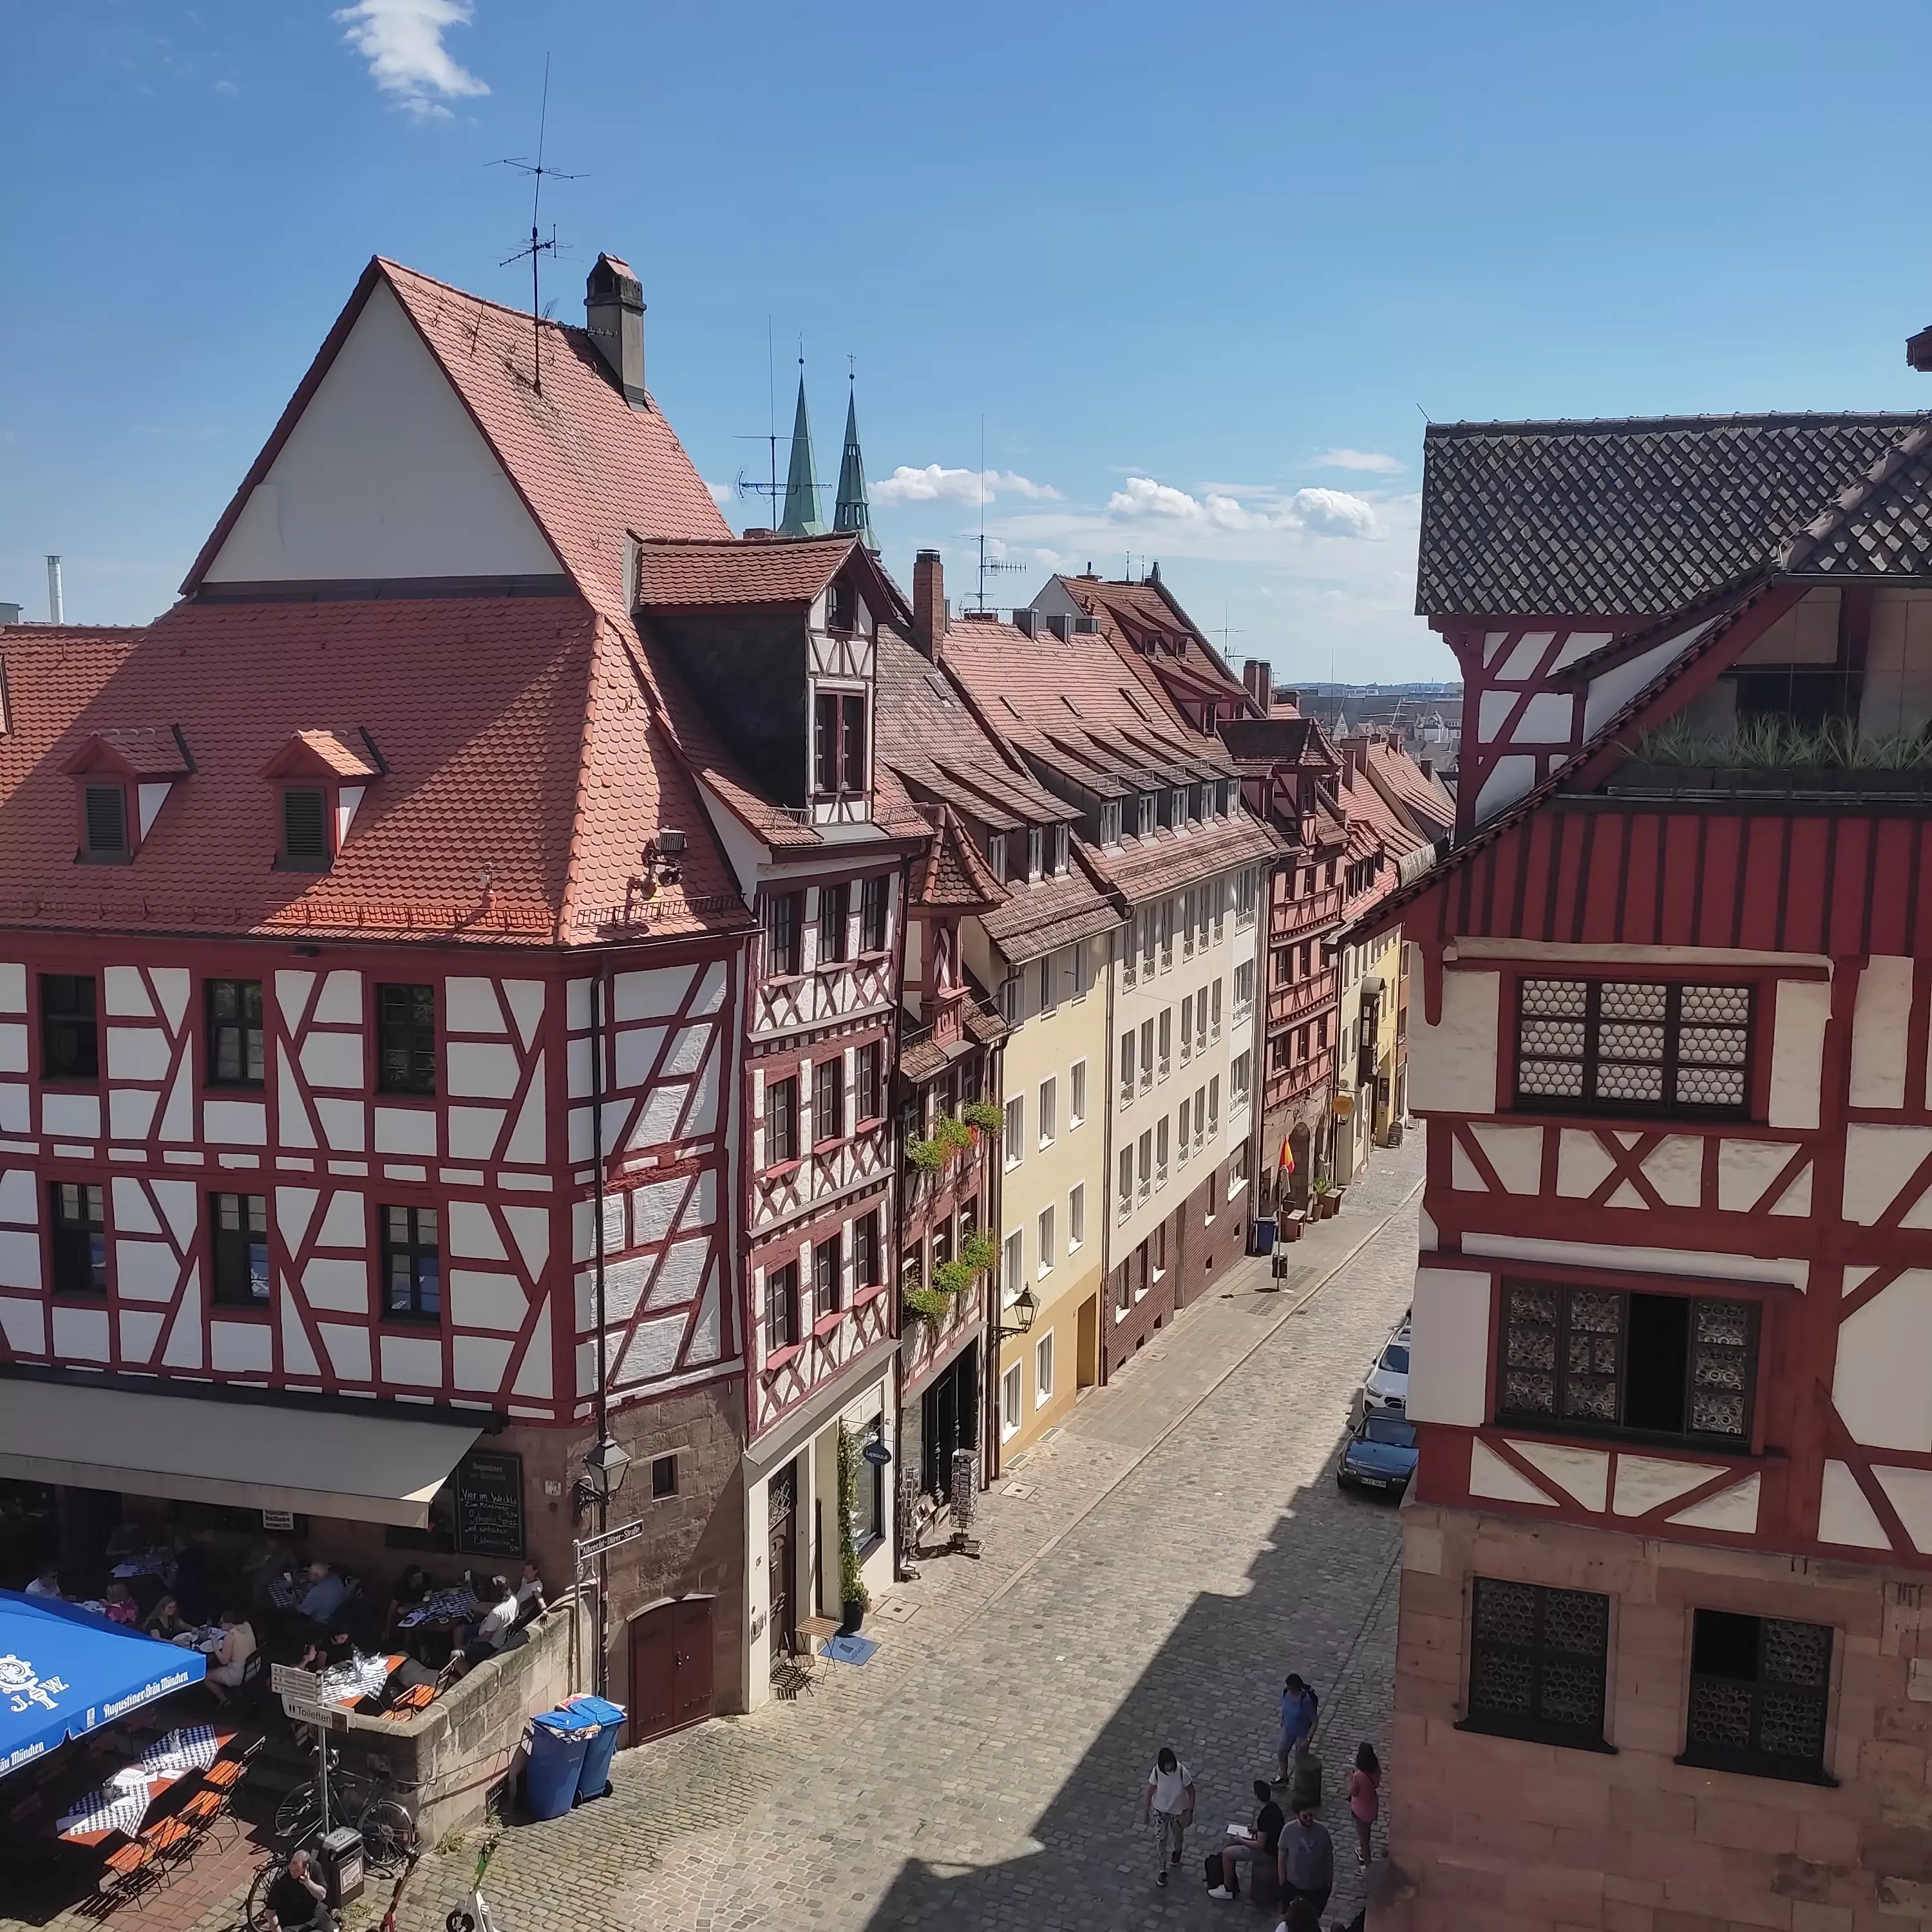 Nuremberg's old town with narrow streets and half-timbered houses belongs in any Germany itinerary.